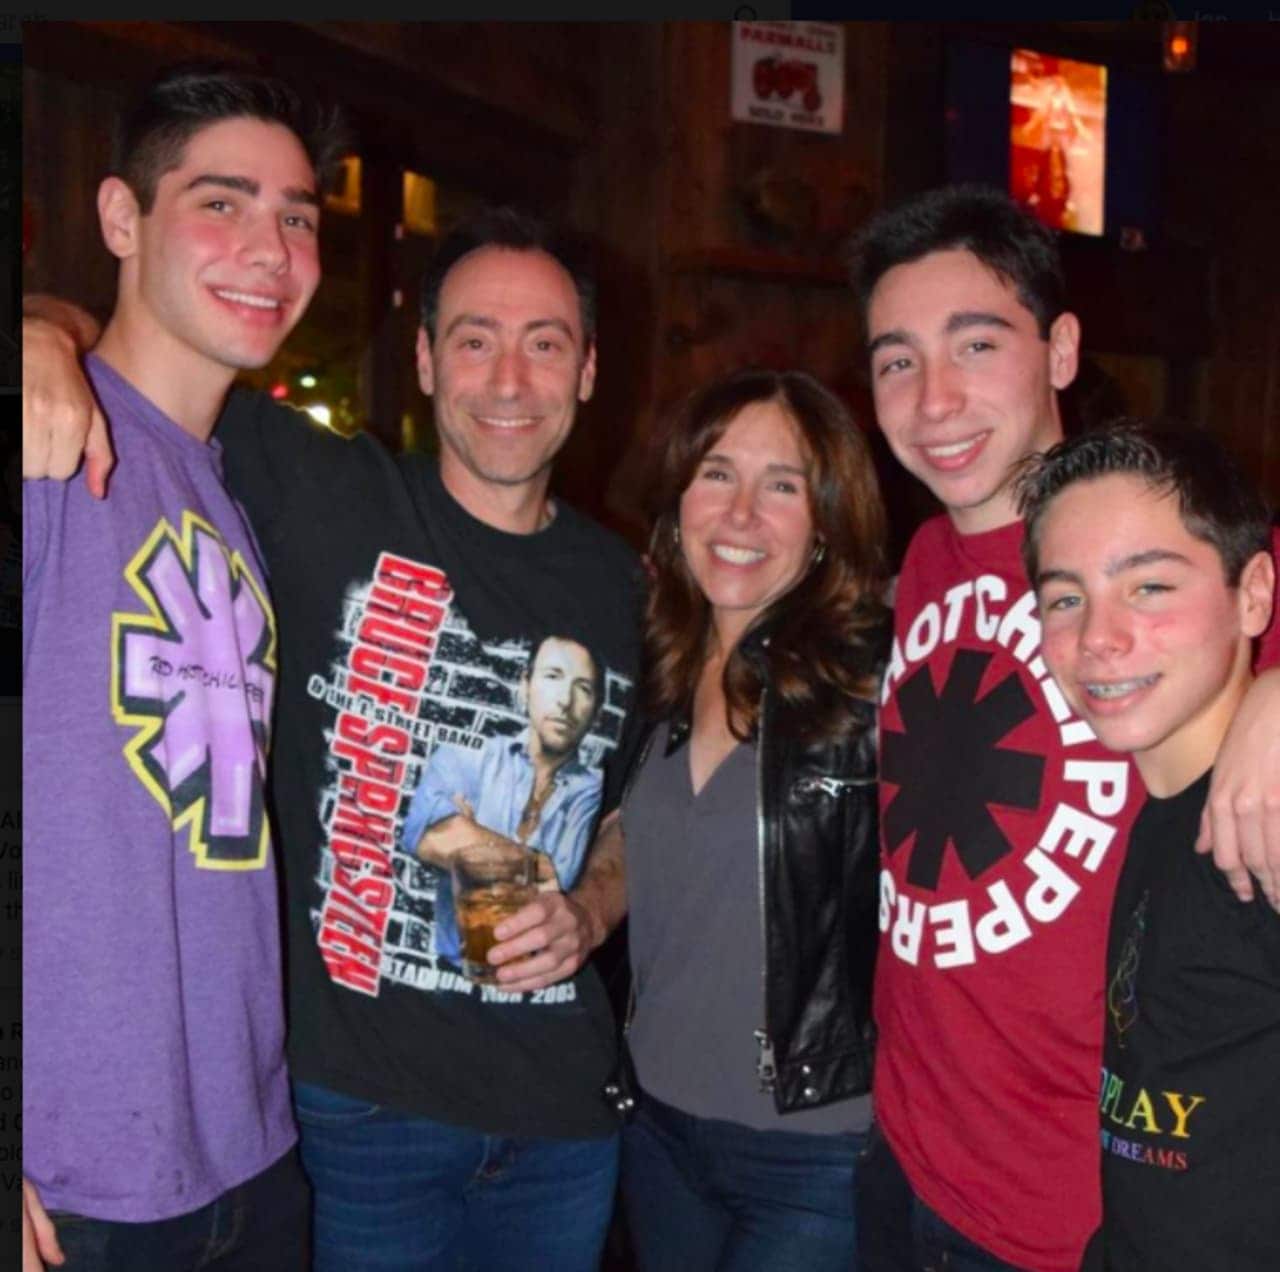 Bruce and Irene Steinberg and their sons, Matthew, William and Zachary of Scarsdale